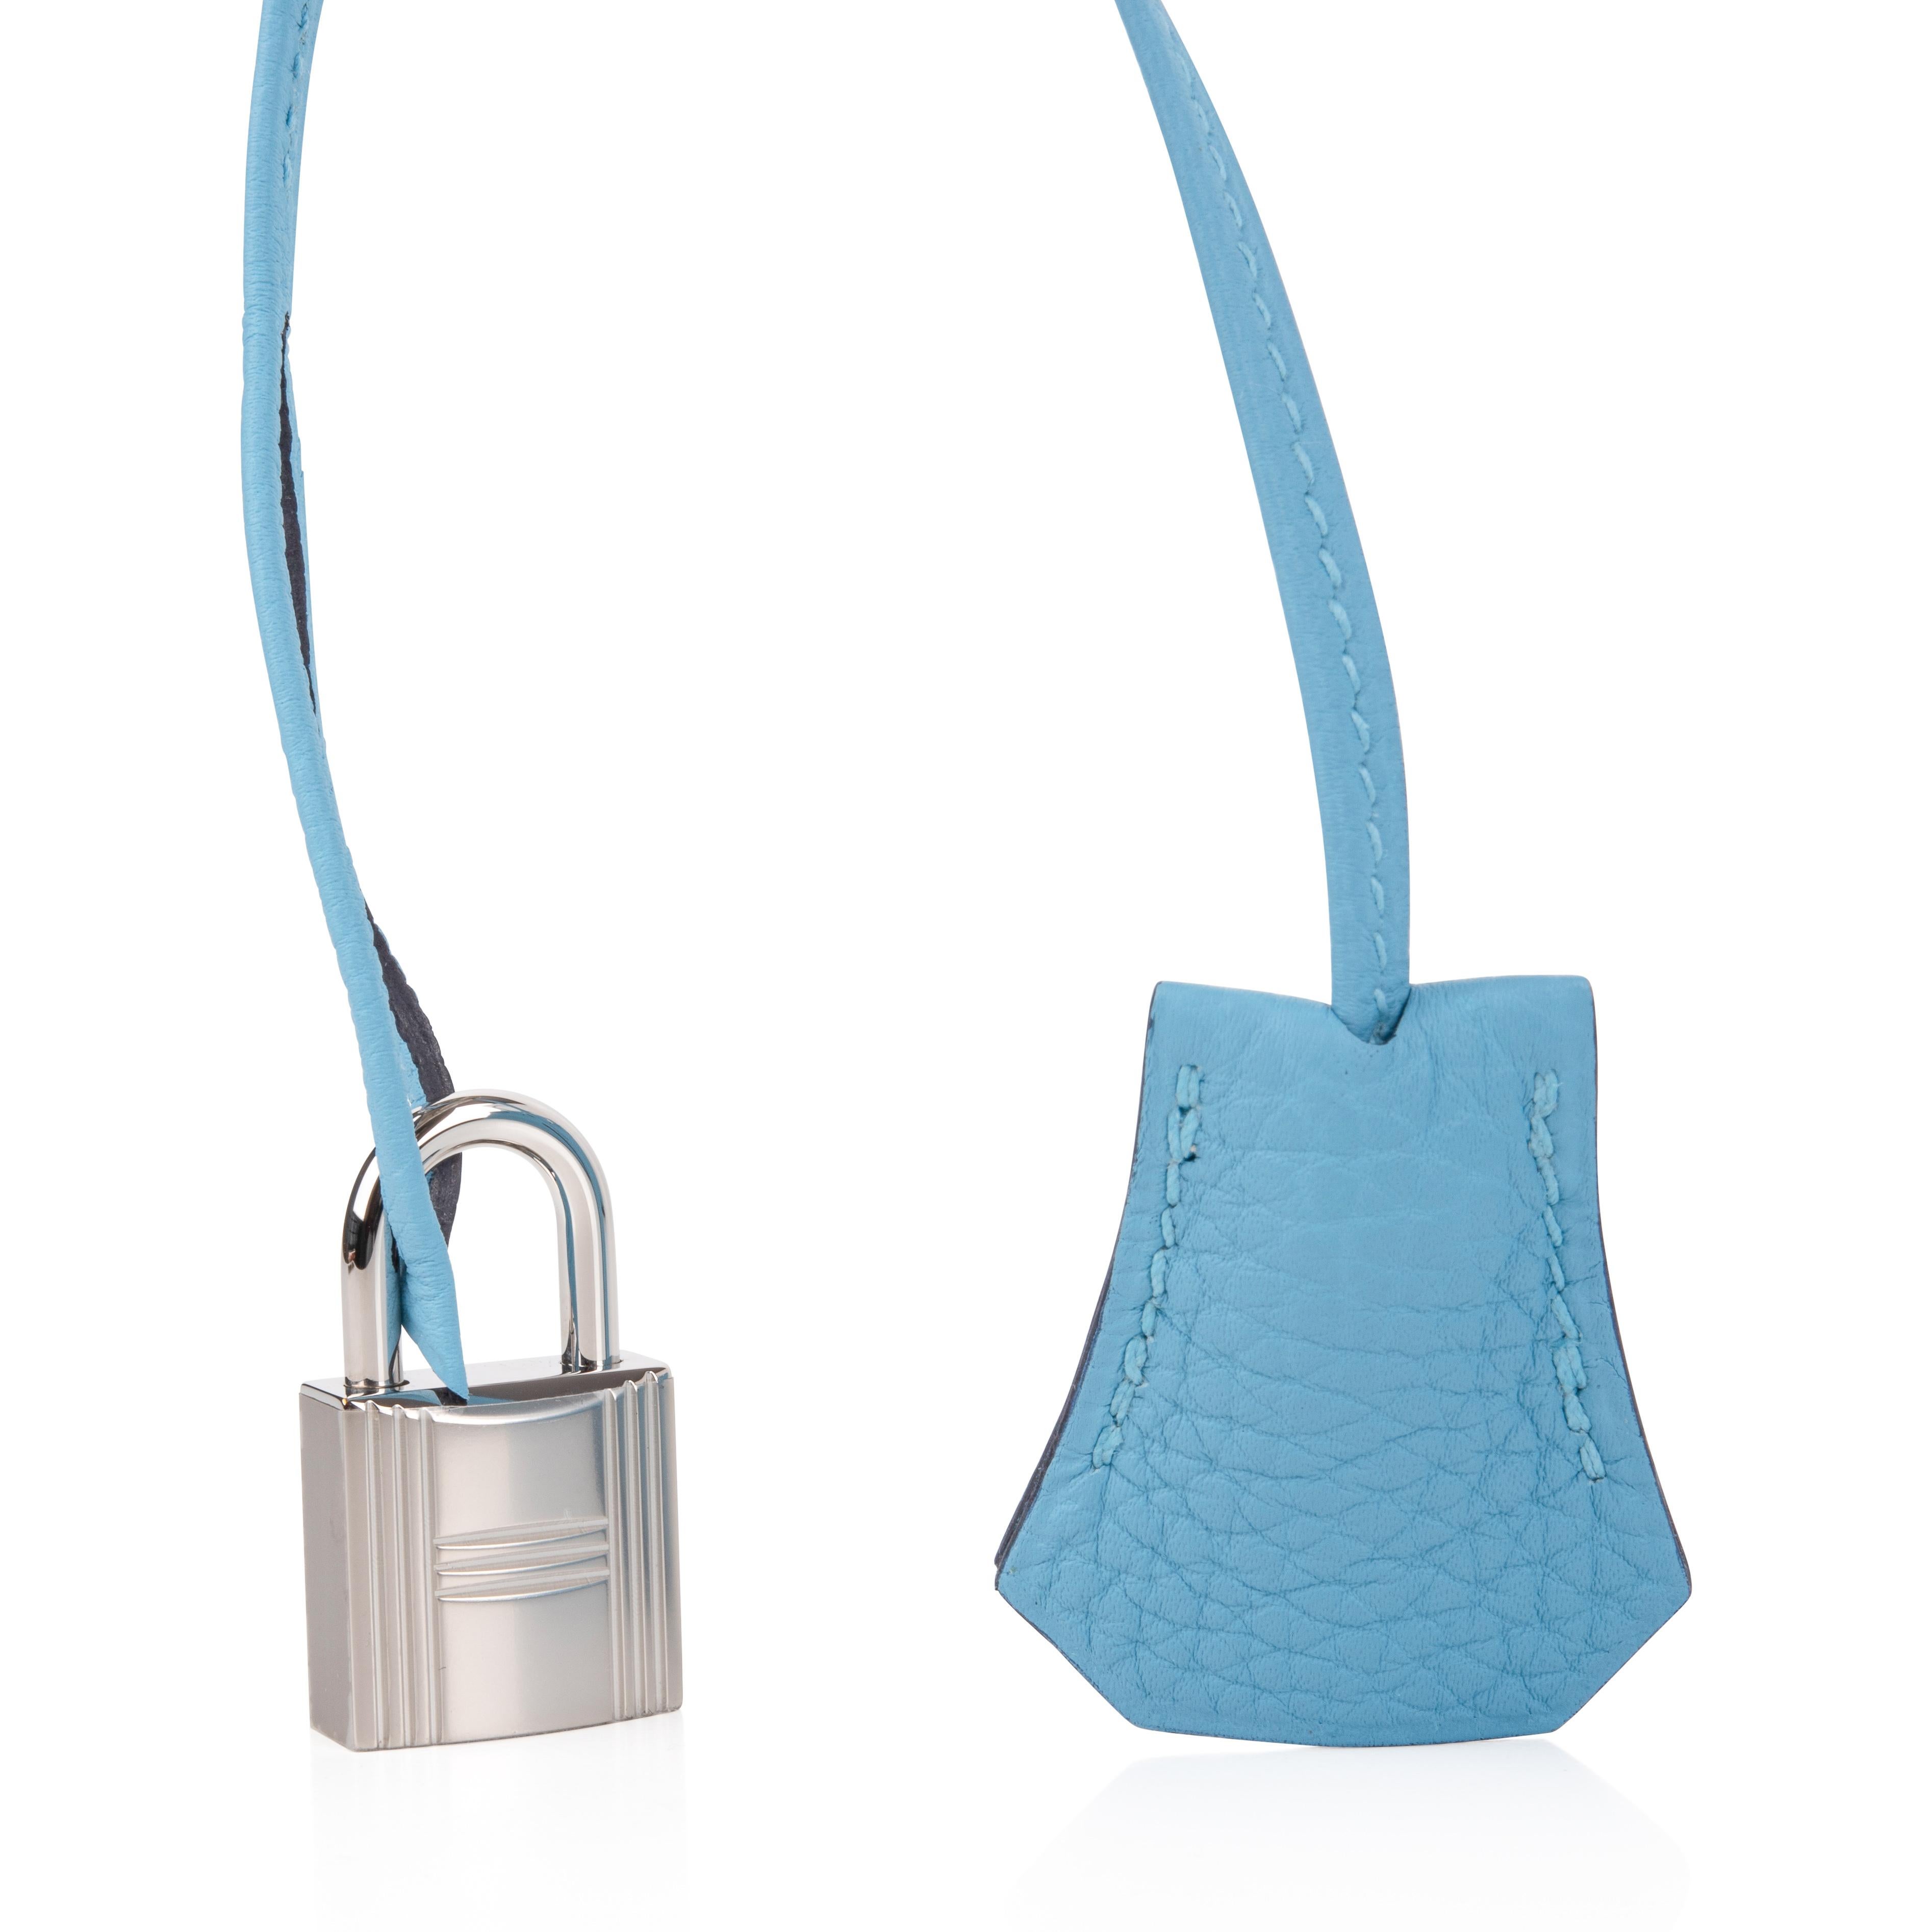 Guaranteed authentic Hermes Birkin 30 bag features sky Bleu du Nord.
This beautiful blue is complimented with palladium hardware.
Togo leather has natural texture and is scratch resistant. 
Comes with the lock and keys in the clochette, sleepers,